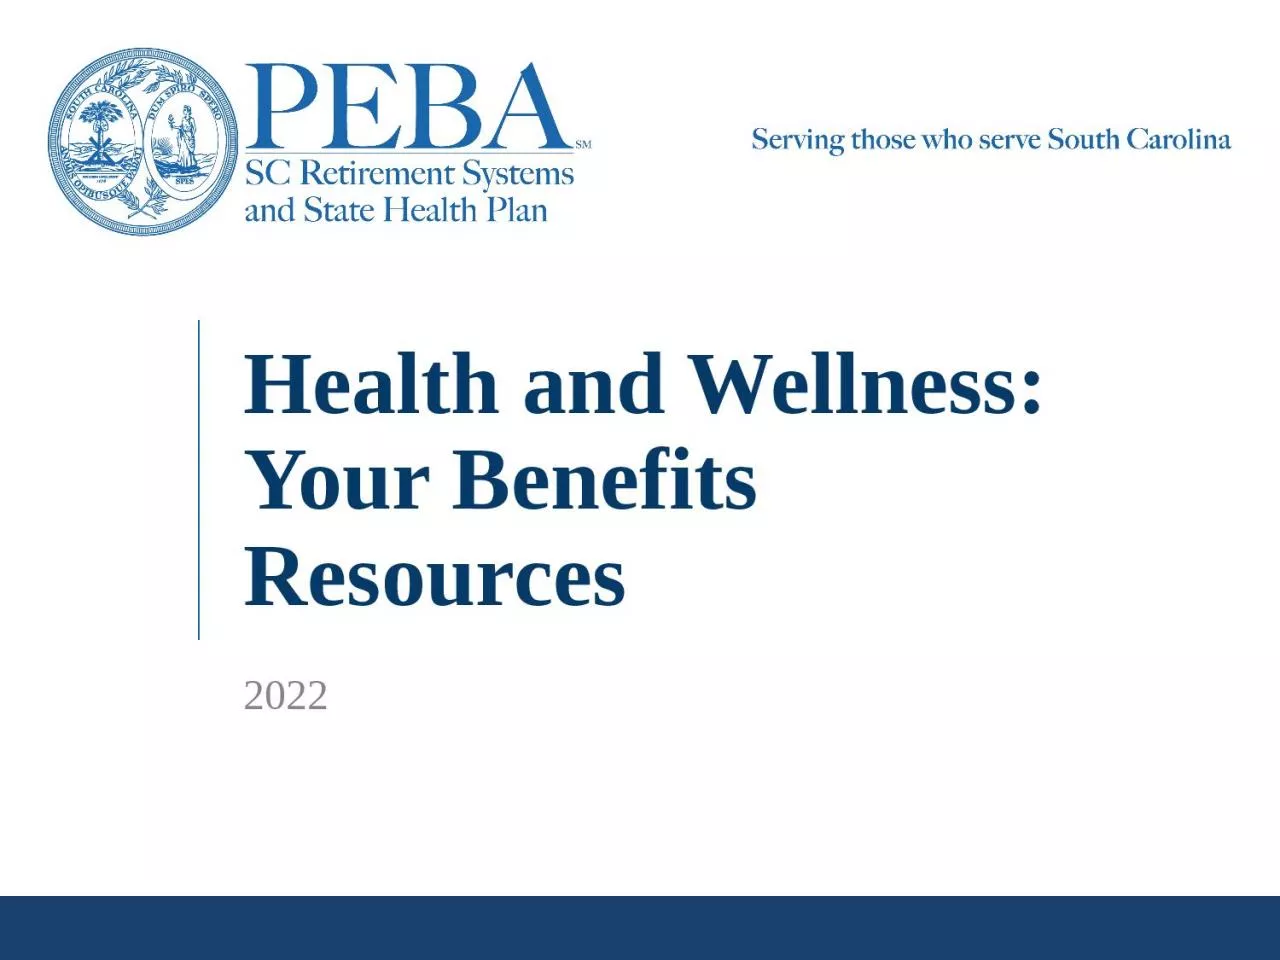 Health and Wellness: Your Benefits Resources